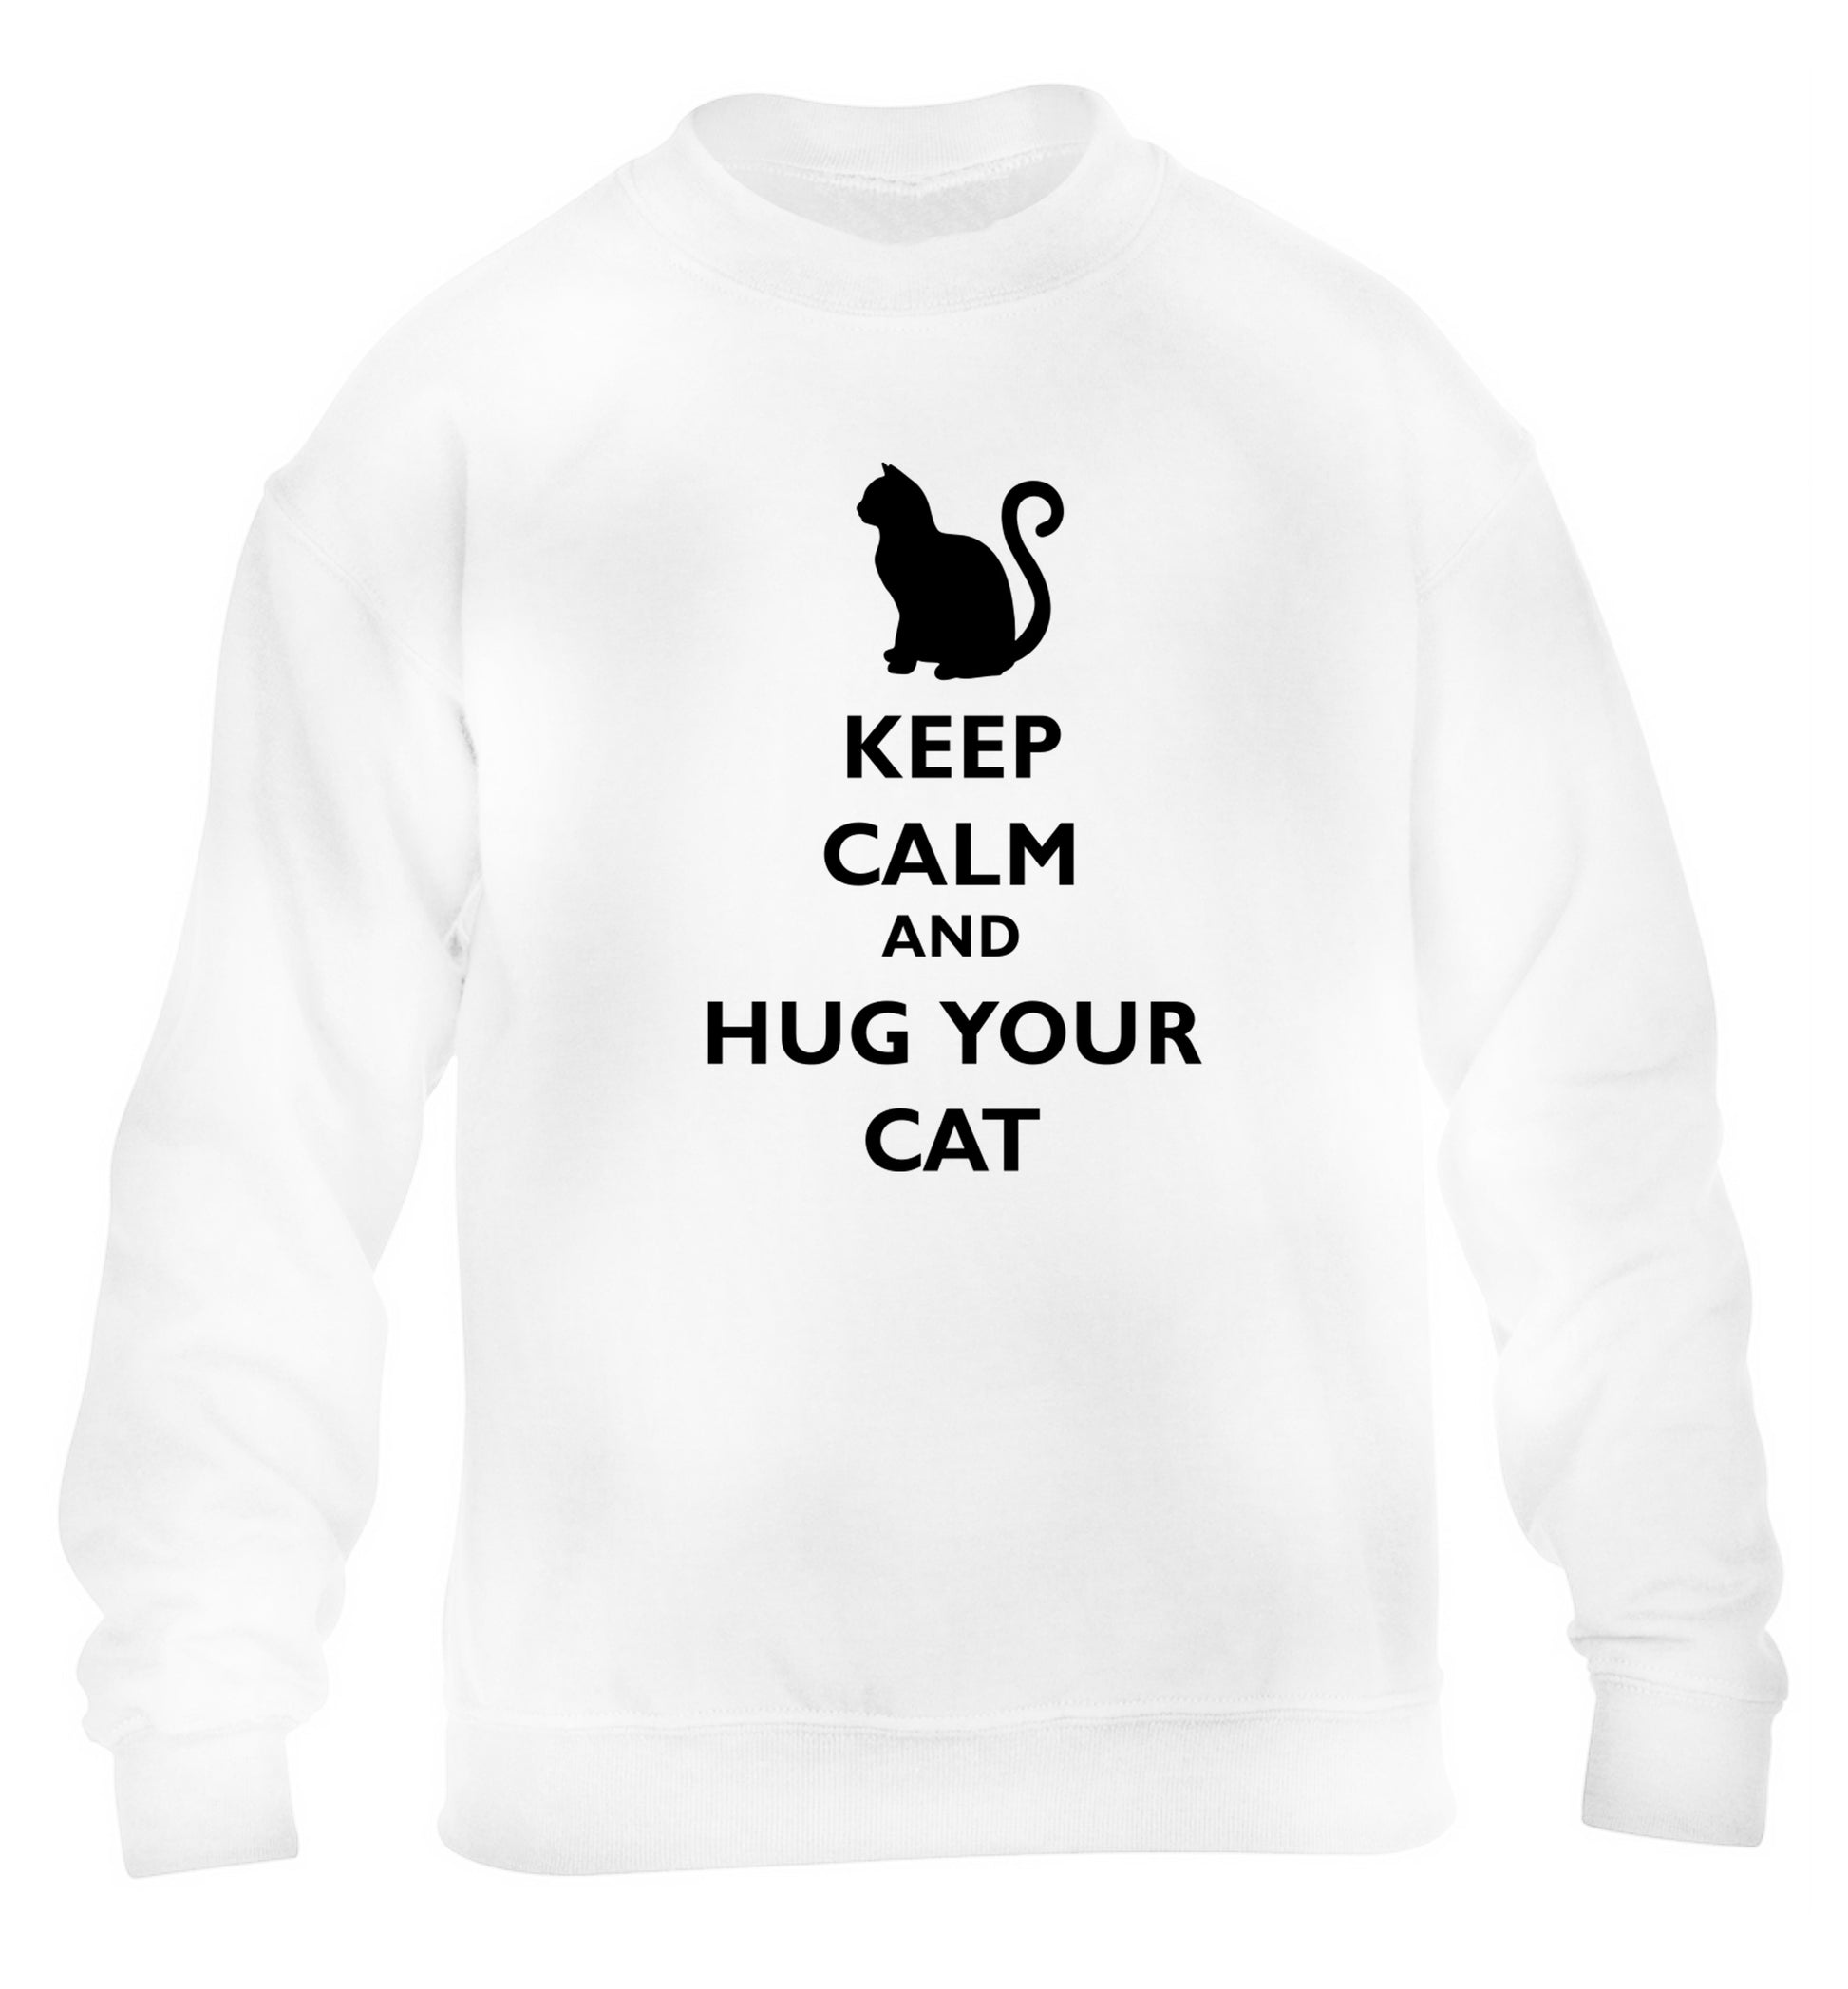 Keep calm and hug your cat children's white sweater 12-13 Years